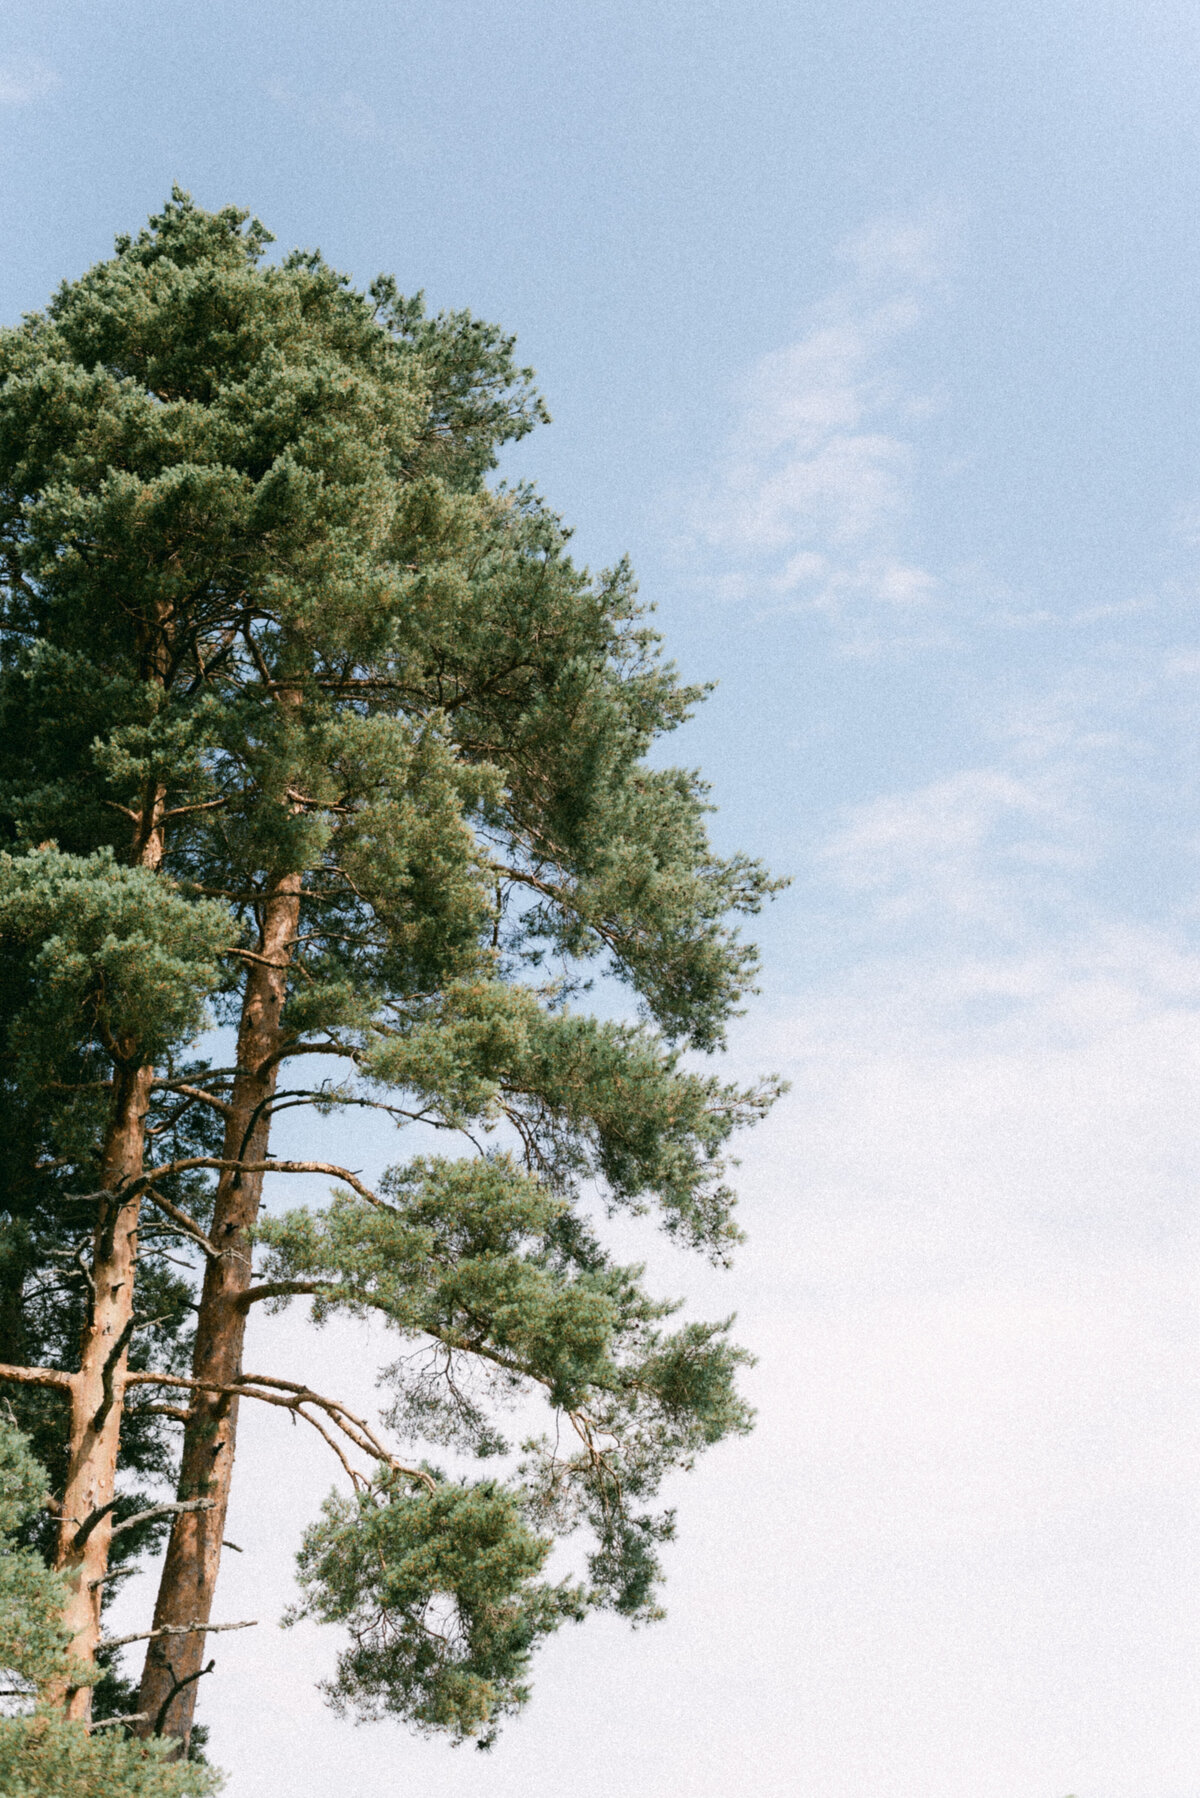 Trees and blue sky on the wedding day. An image by wedding photographer Hannika Gabrielsson.